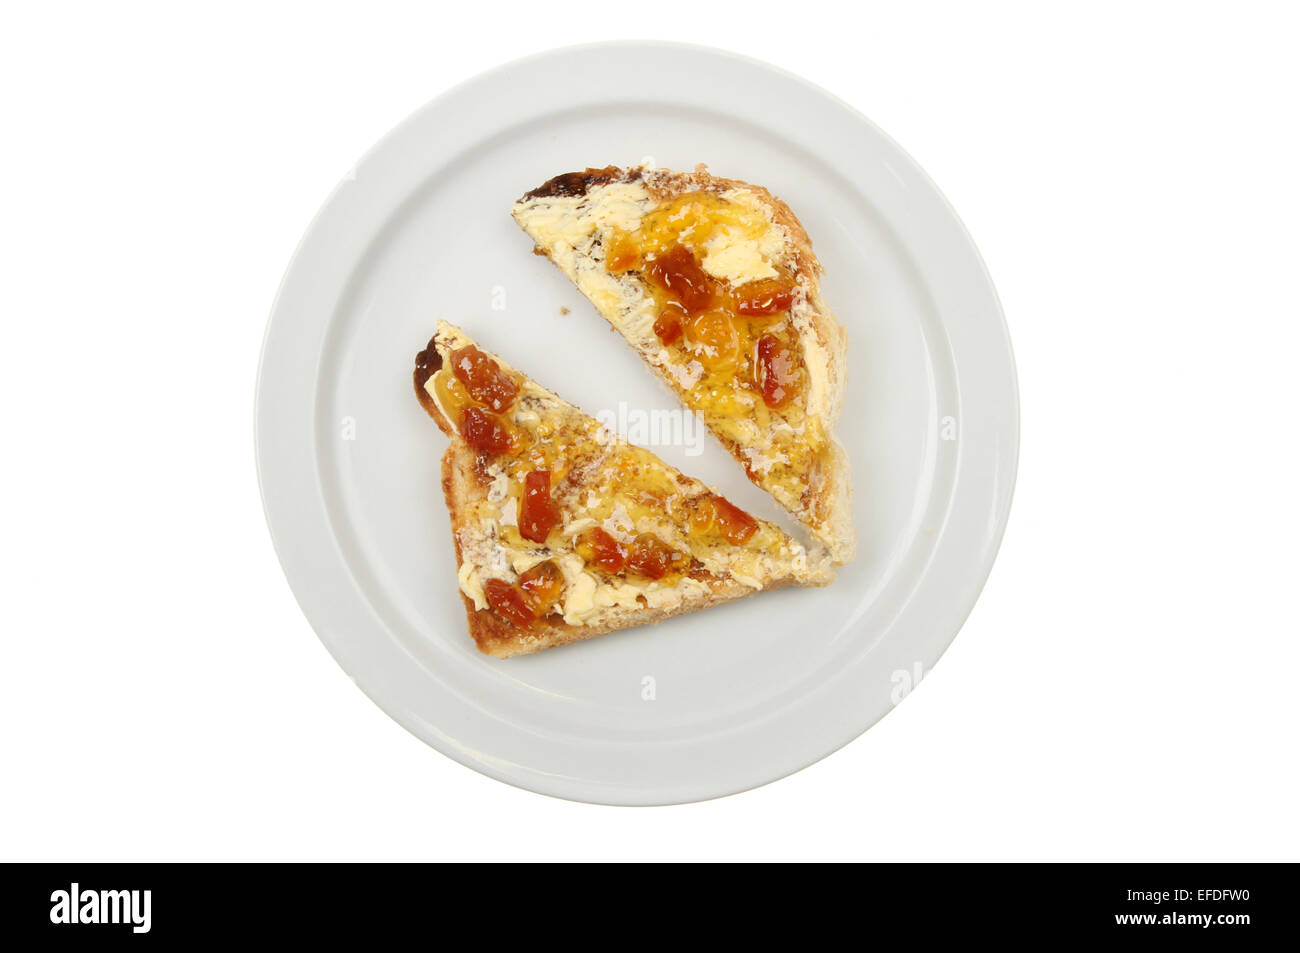 Buttered toast with marmalade on a plate isolated against white Stock Photo